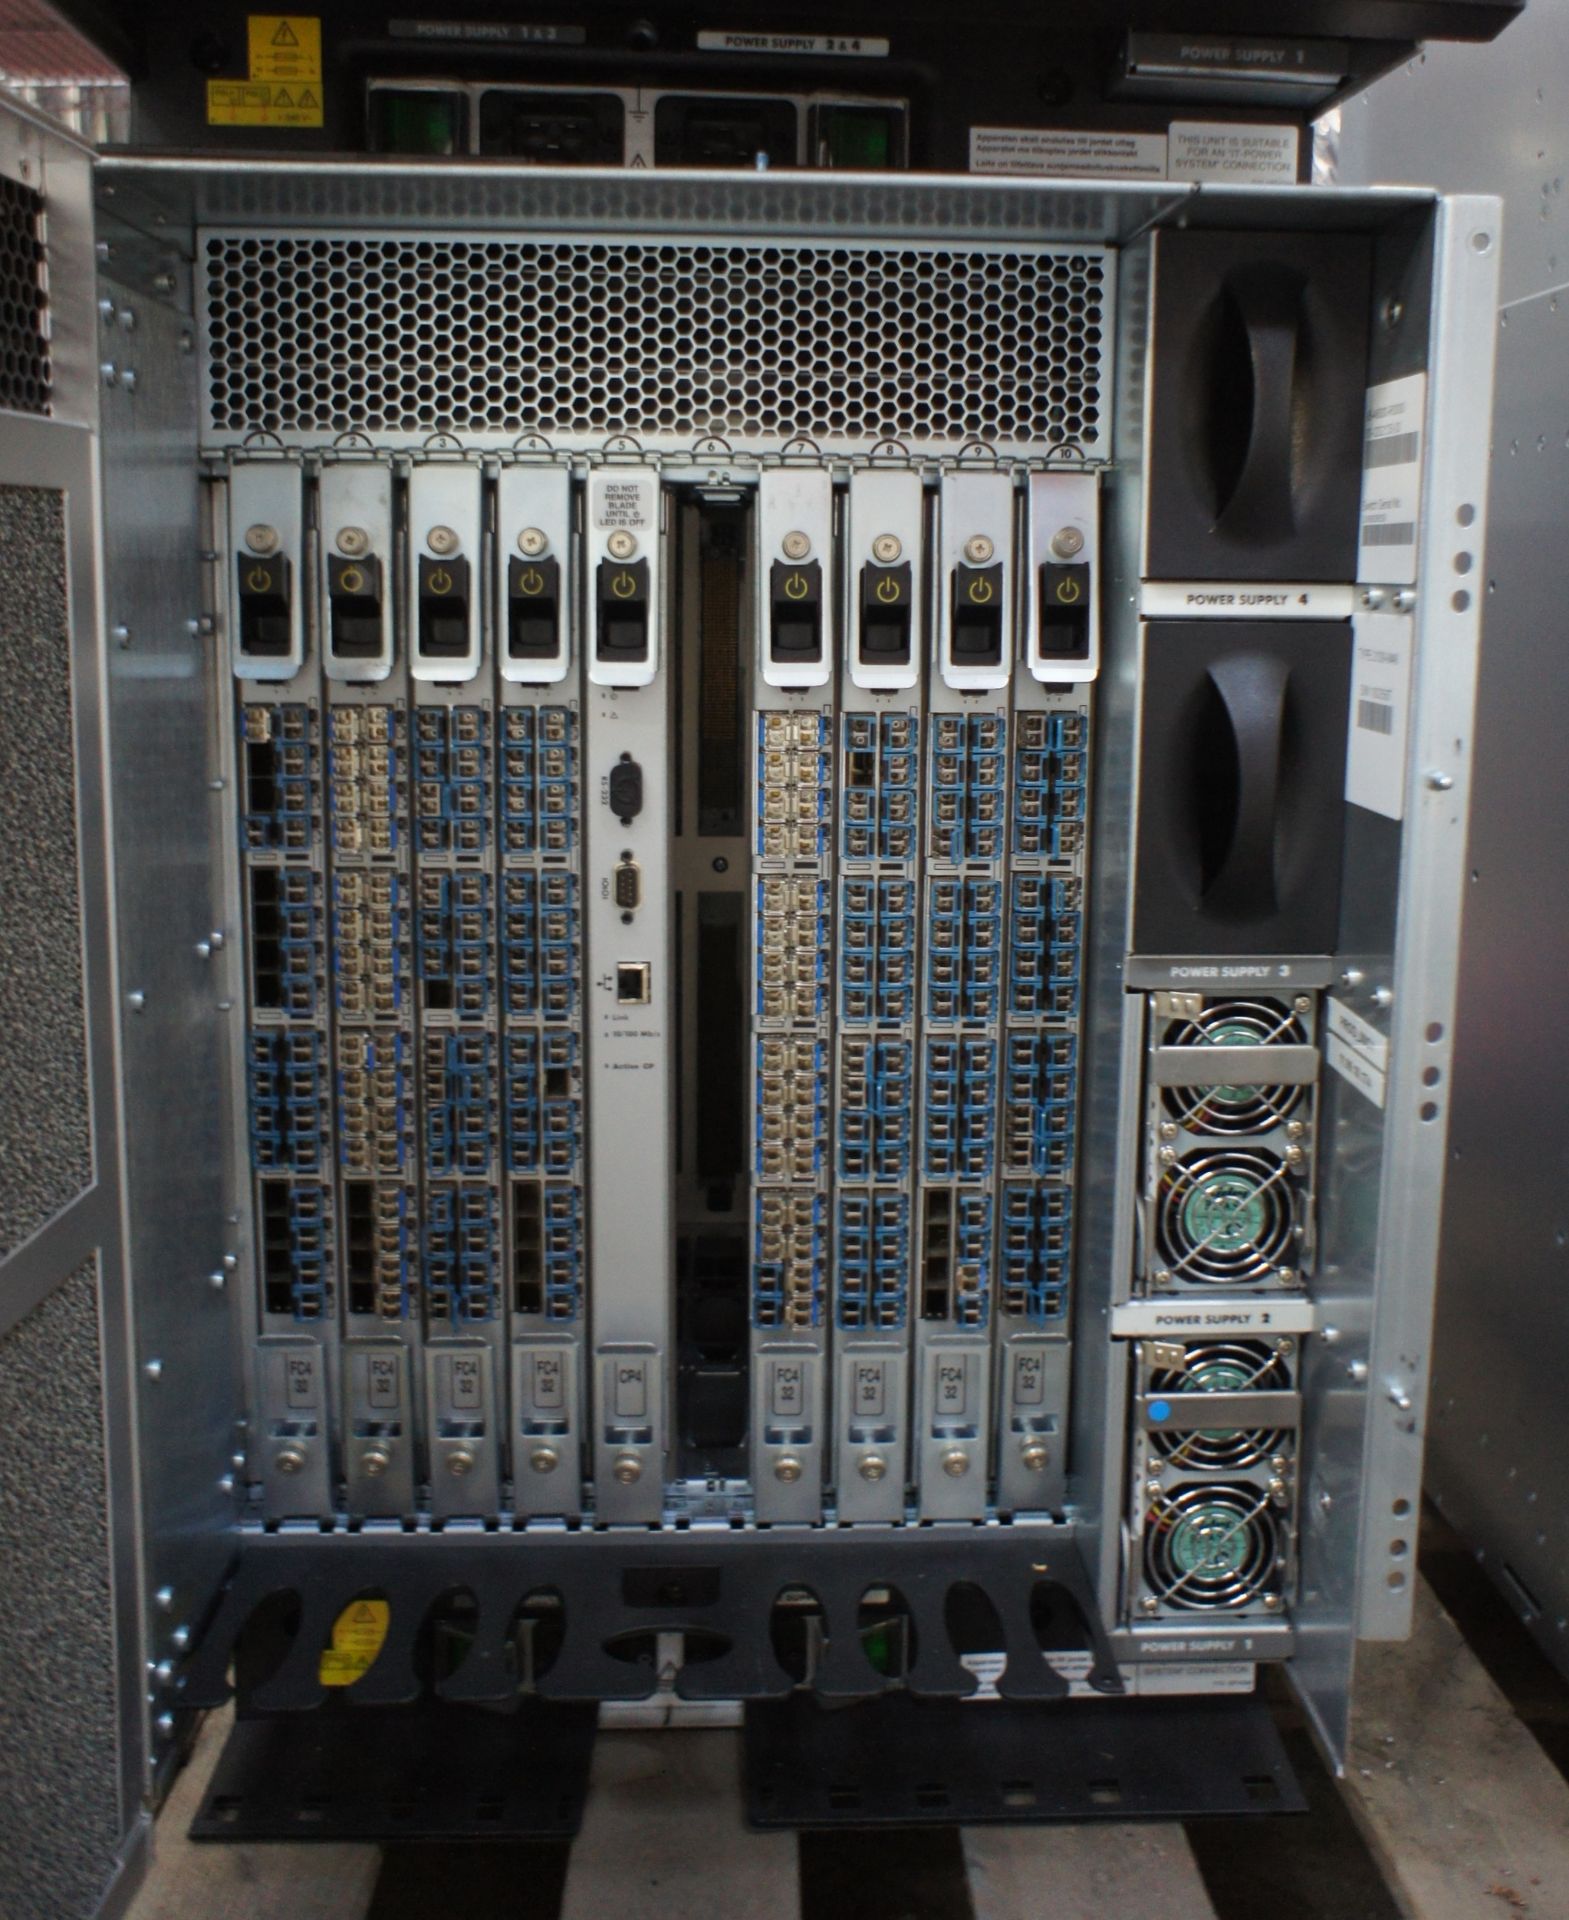 IBM2109-M48 SAN256 director cabinet with 8x FC4/32 cards and 1x CP4 cards, IBM2109-M48 SAN256 - Image 5 of 35